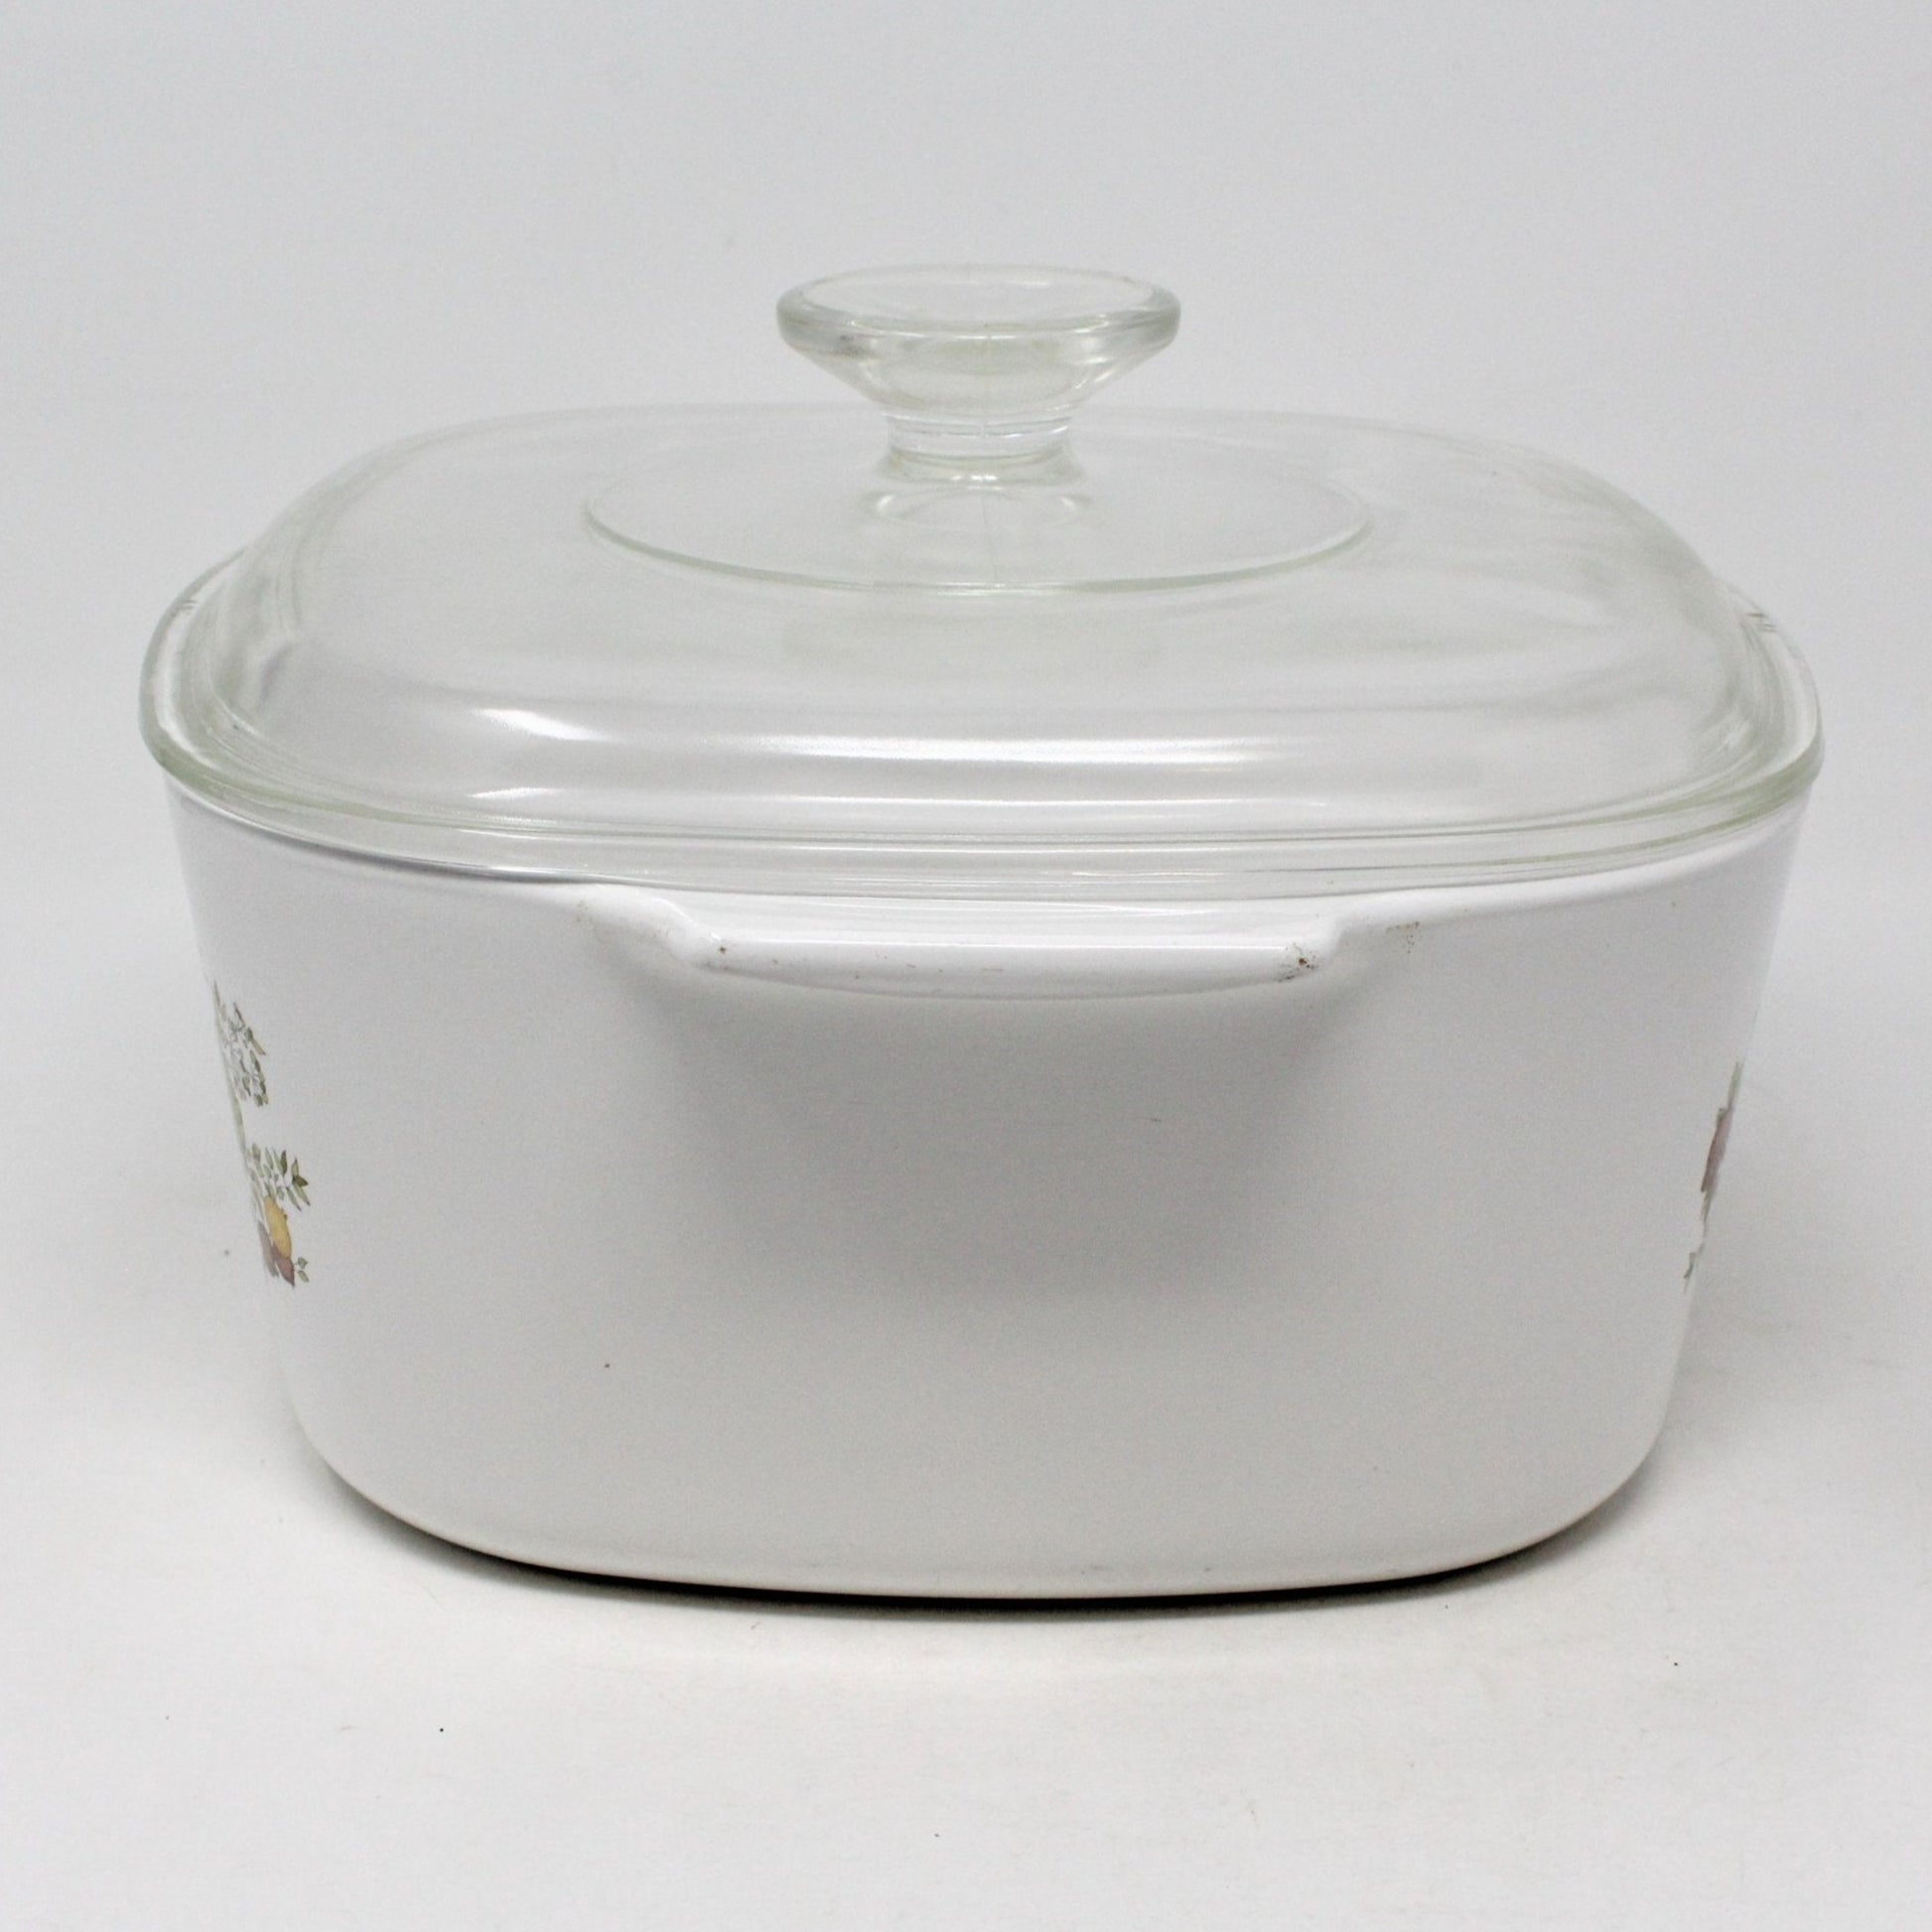 VINTAGE Corning Ware Spice of Life Casserole Dish Pyrex Lid Electric Skillet